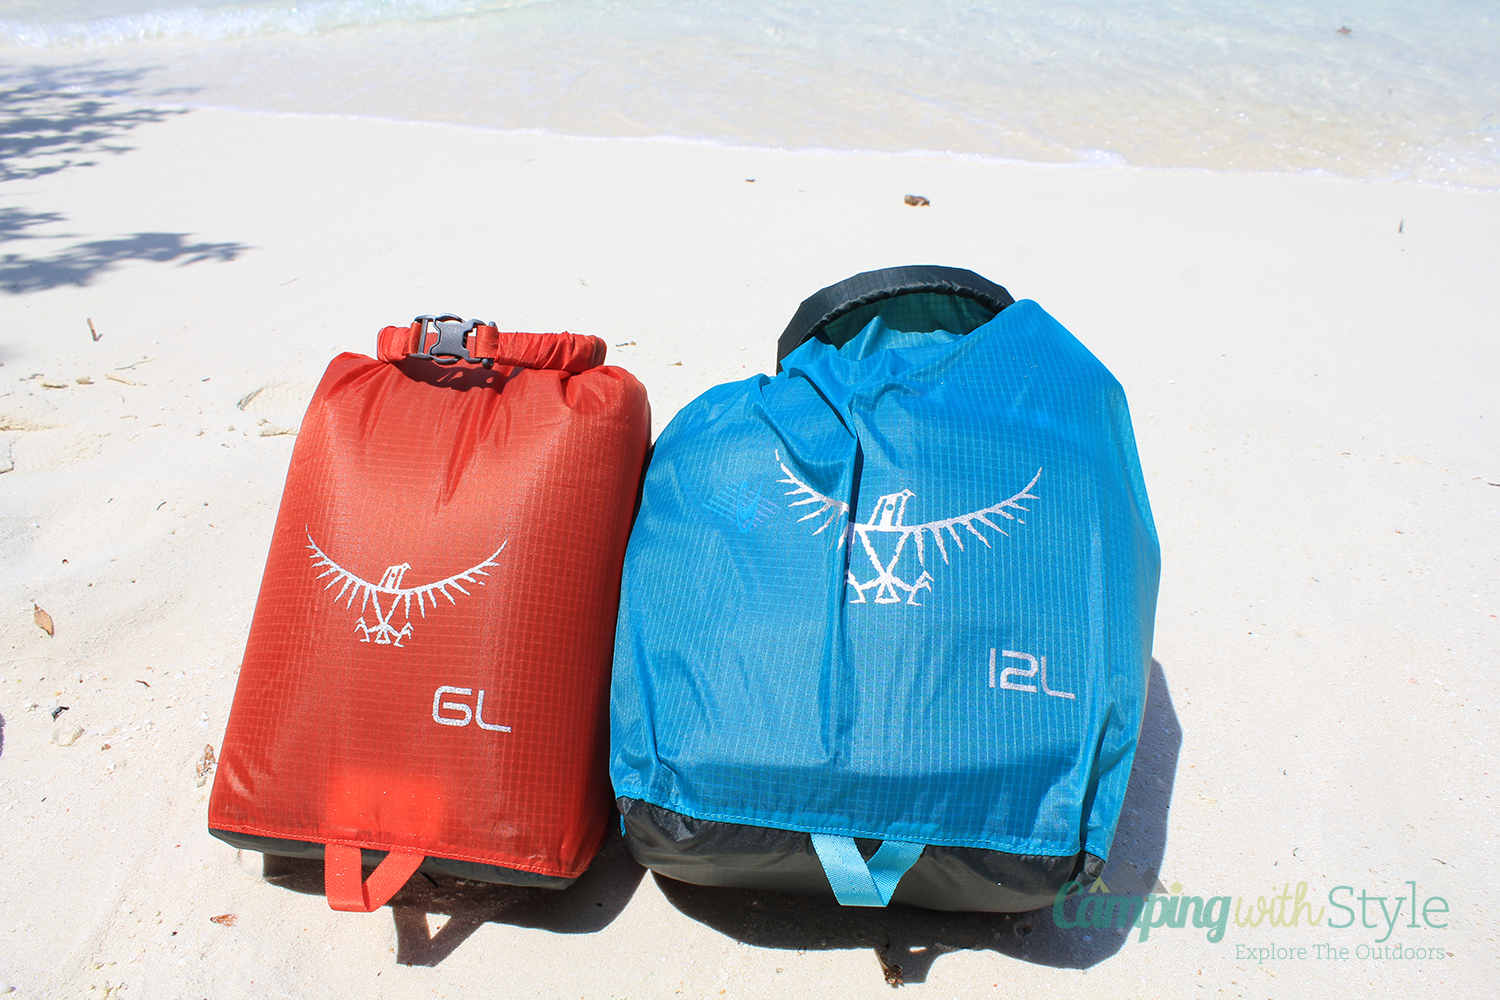 Onderdompeling niemand zuiden GEAR | We Discover Loads Of Uses For Osprey Ultralight Drysacks